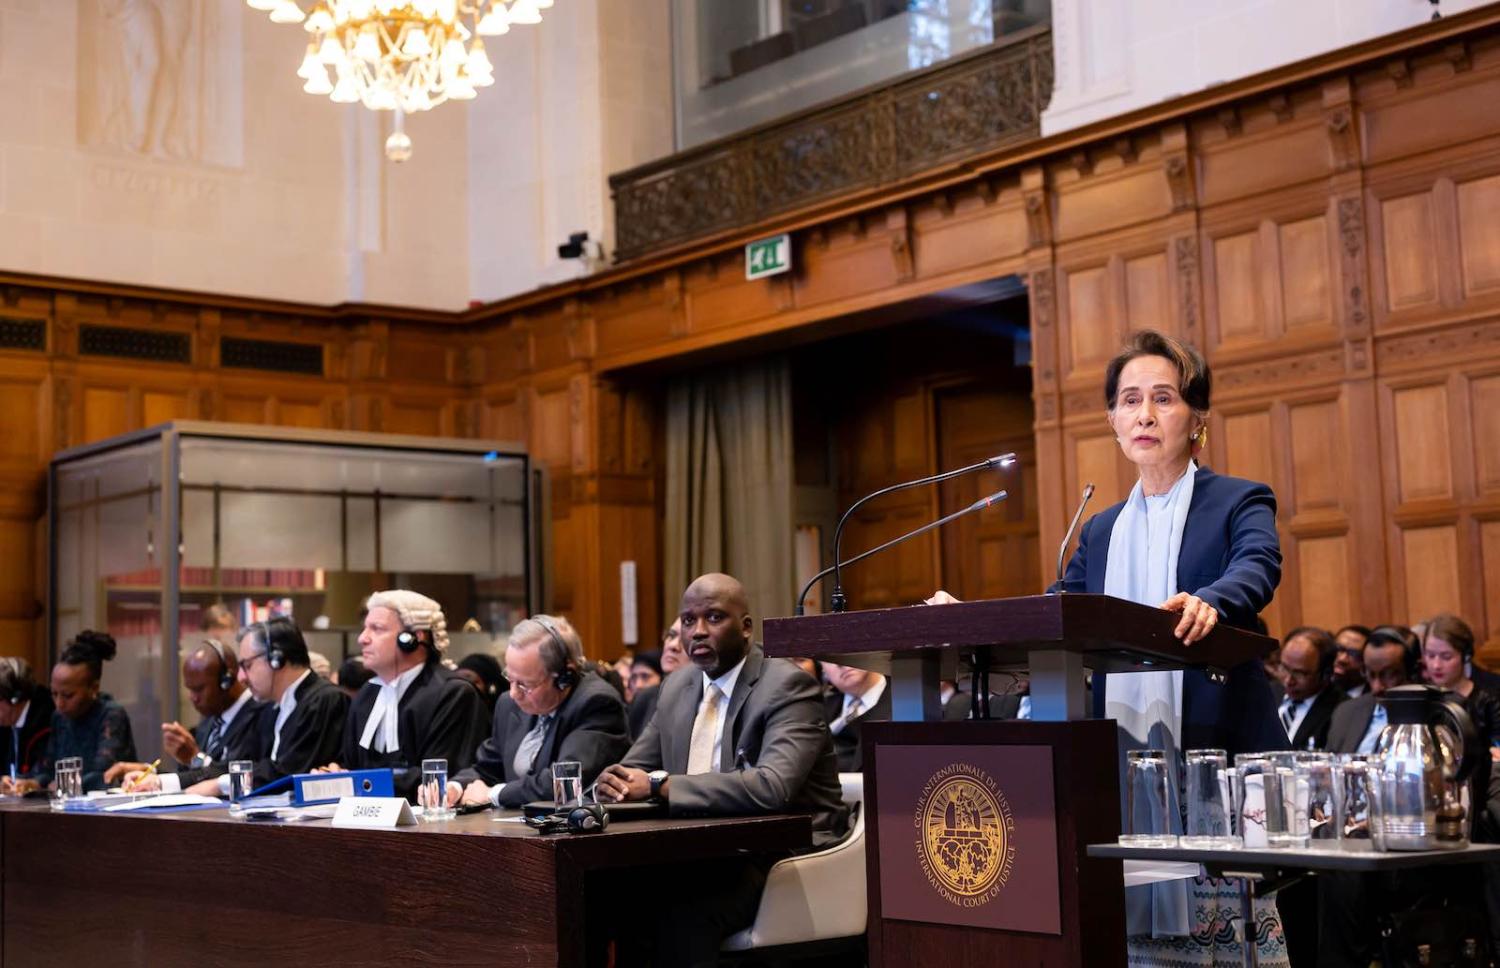 Aung Suu Kyi defends Myanmar against accusations of genocide against Rohingya at the top UN court in The Hague (Photo: International Court of Justice via Getty Images)